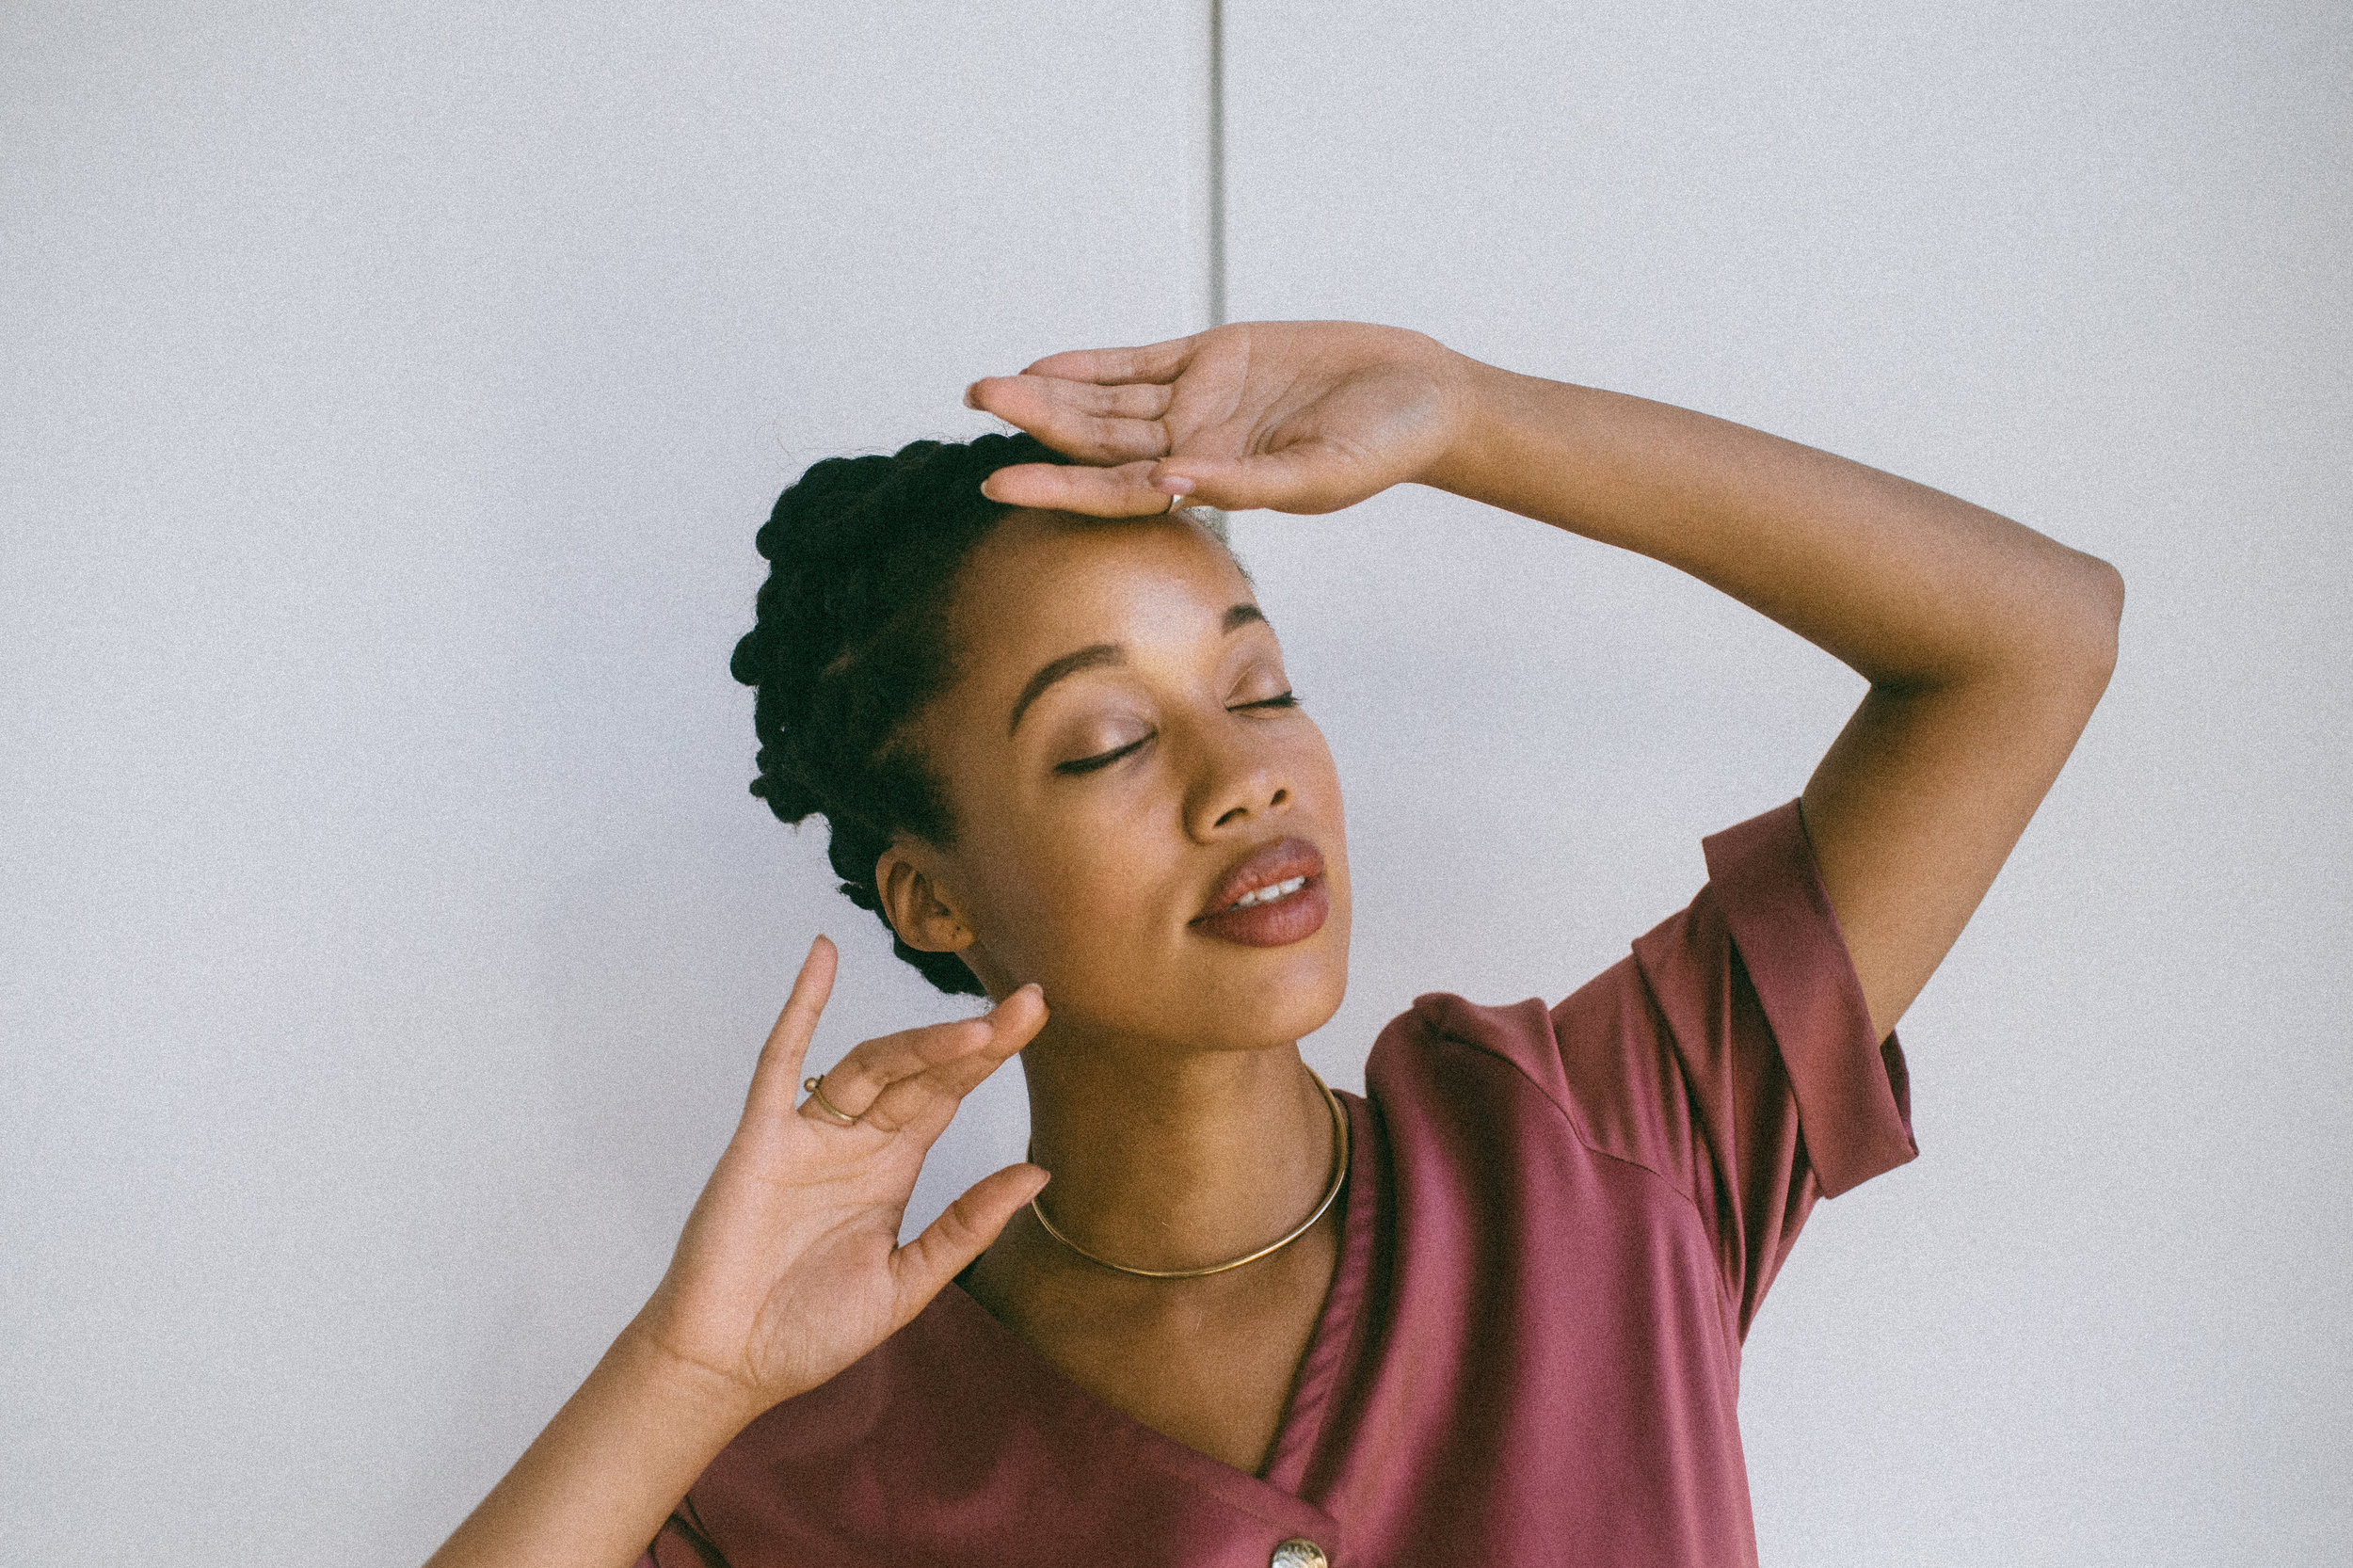  A wellness visionary, yoga and meditation teacher, creative writer, and founder of the culture-shifting lifestyle brand synonymous with black women's wellness –&nbsp; Black Girl in Om  